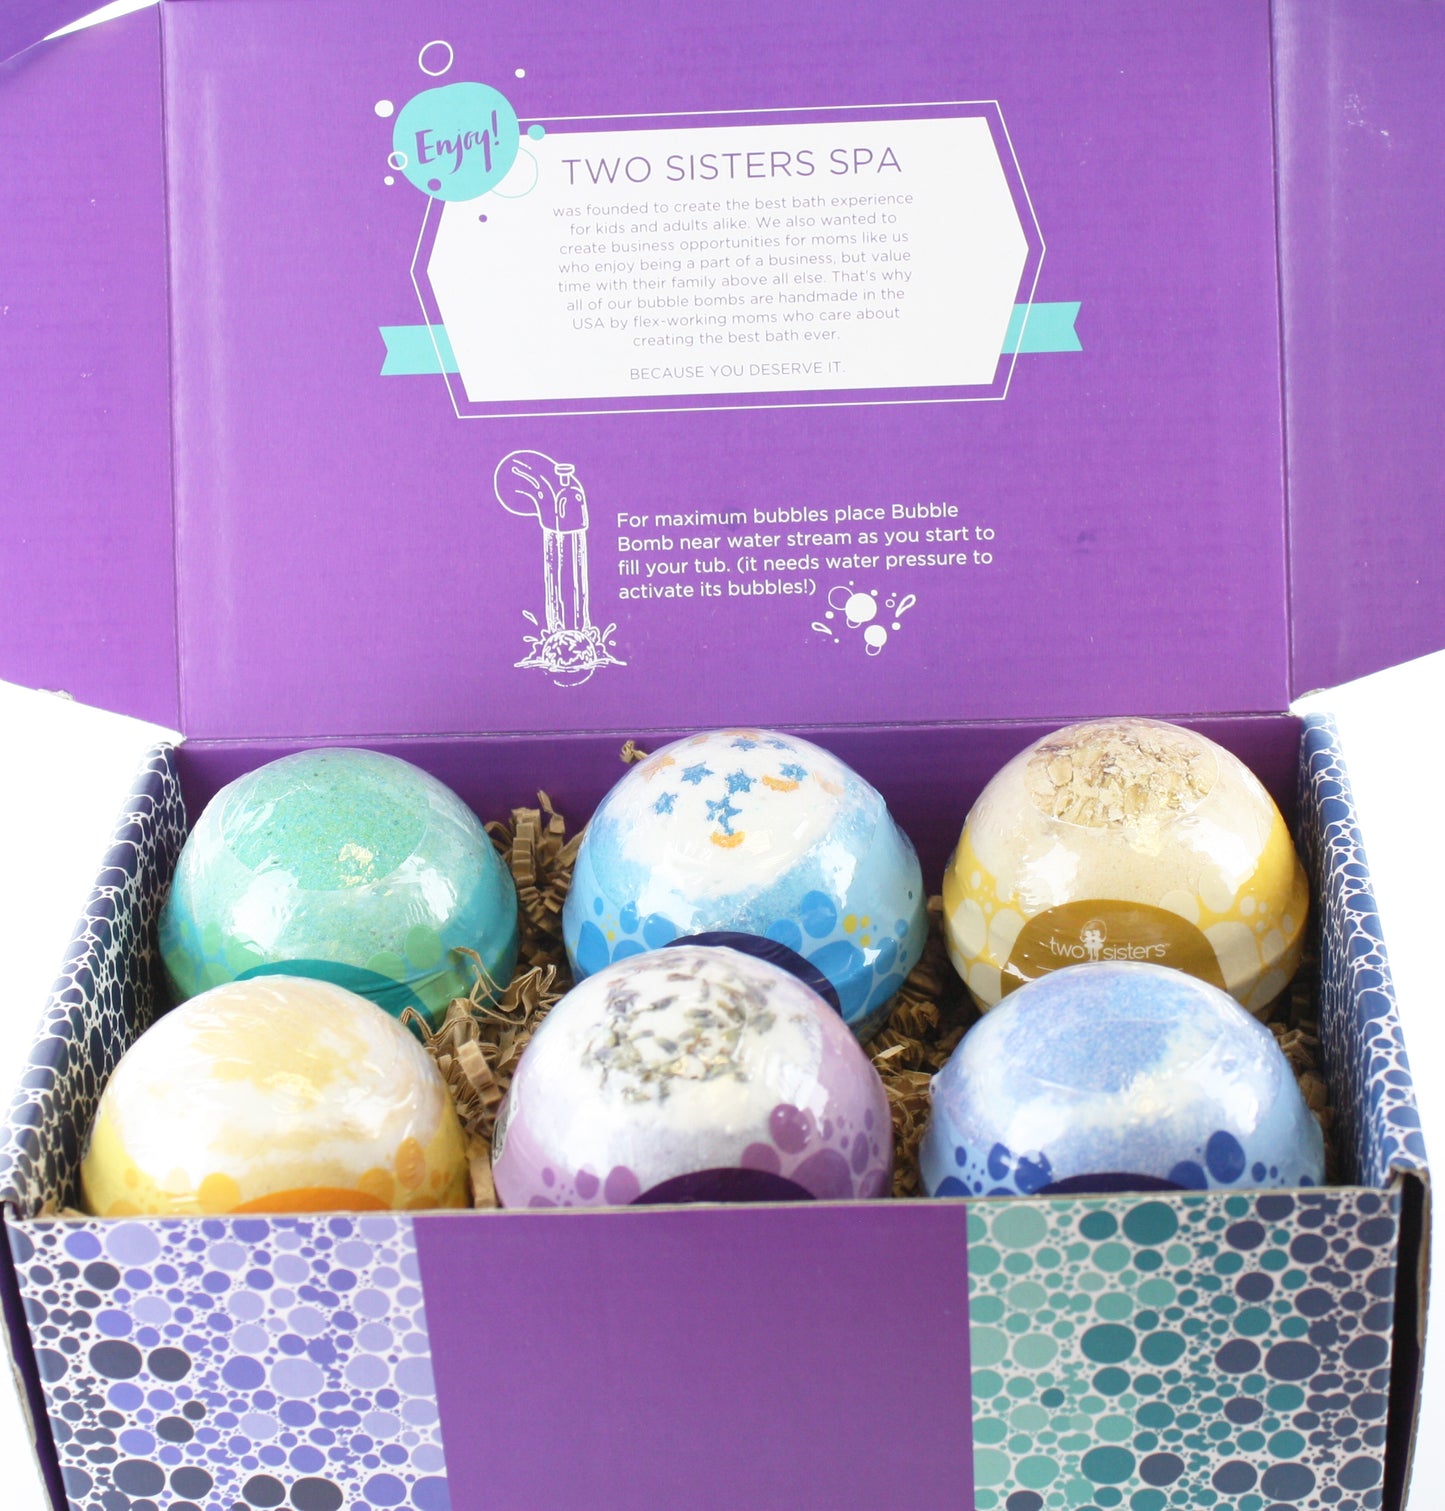 6 Relaxing Bubble Bath Bombs Gift Set - Two Sisters Spa